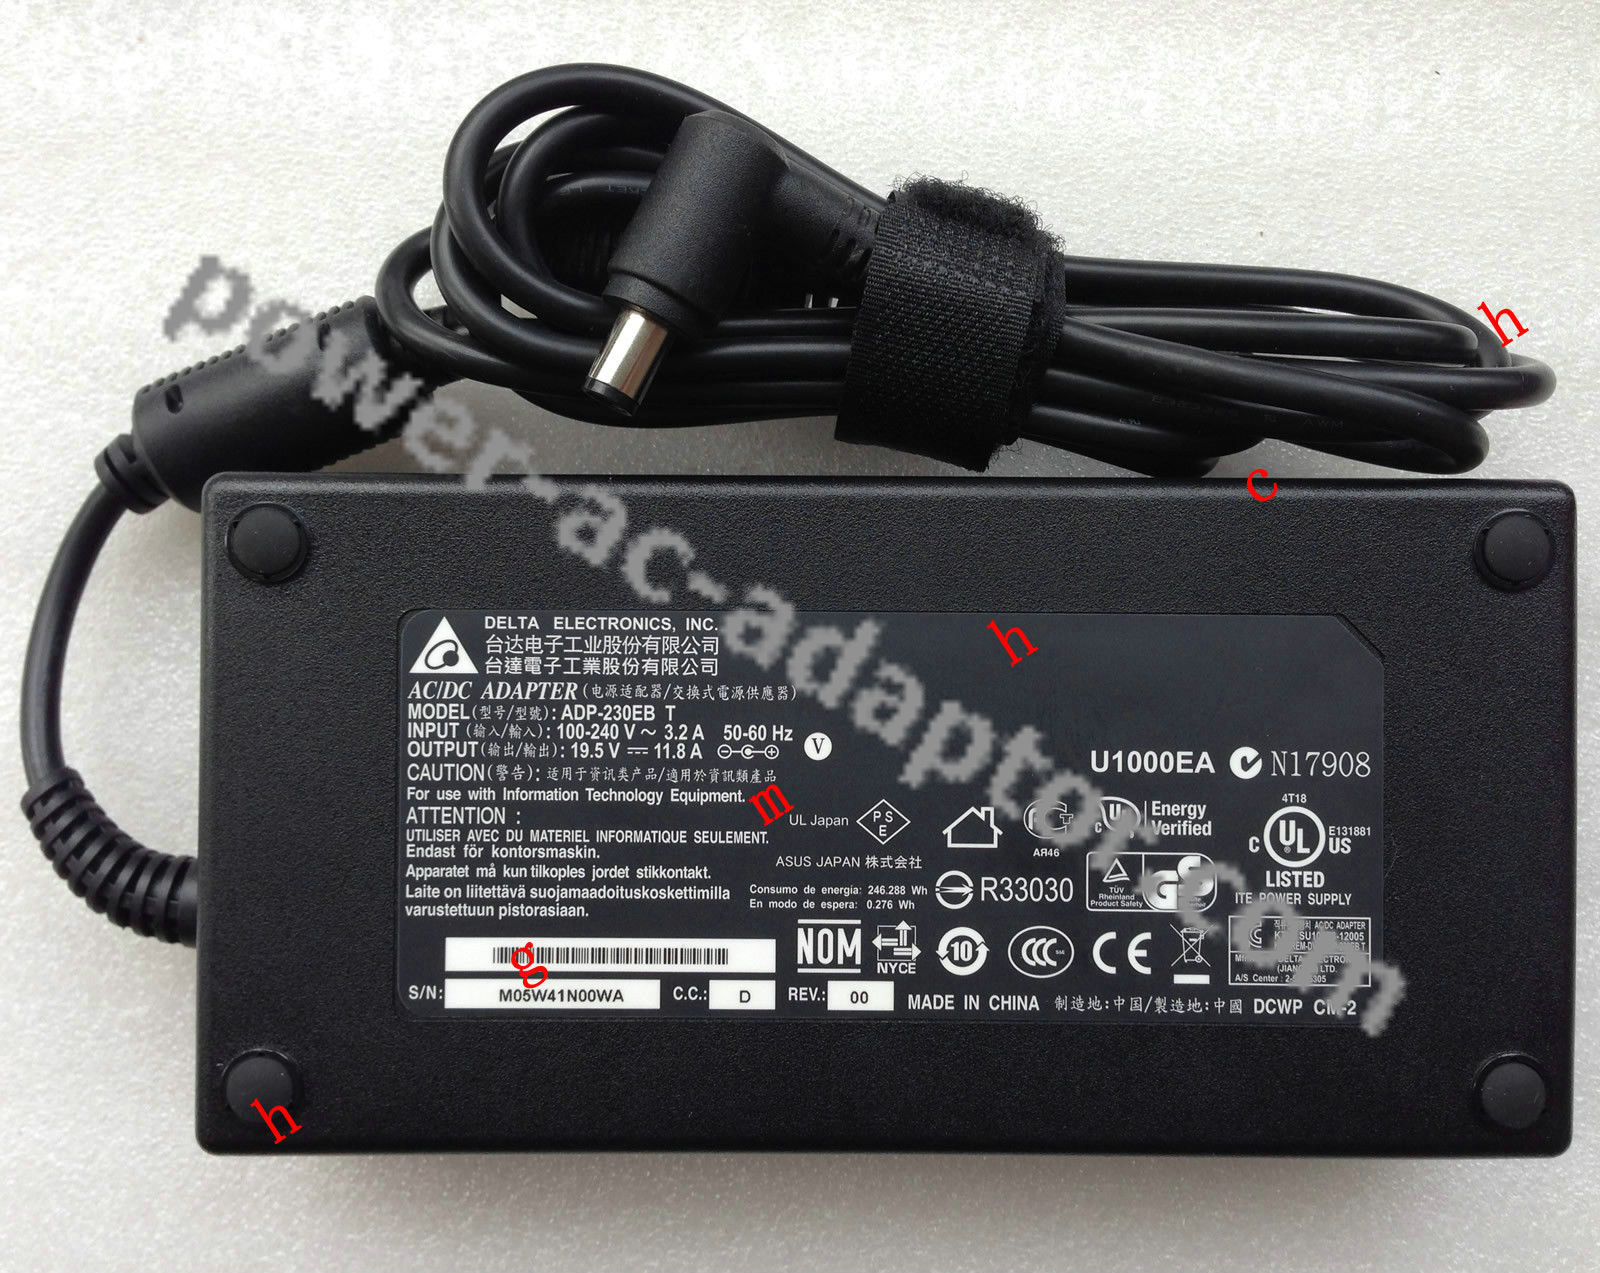 230W AC Adapter Cord for ASUS ROG G750JZ-T4024H Gaming Laptop